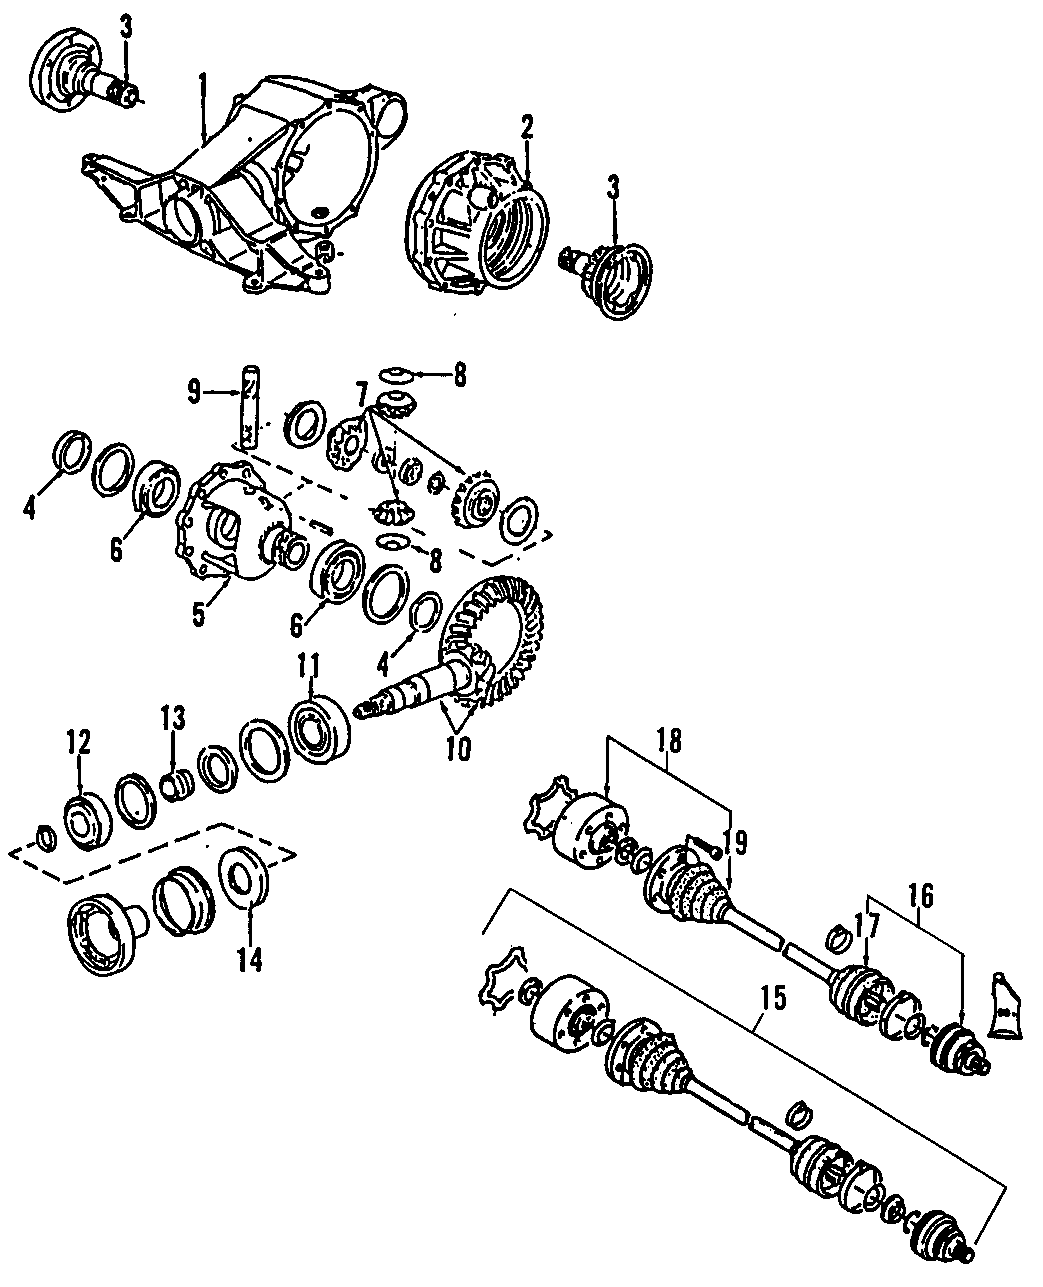 10DRIVE AXLES. REAR AXLE. AXLE SHAFTS & JOINTS. DIFFERENTIAL. PROPELLER SHAFT.https://images.simplepart.com/images/parts/motor/fullsize/E255240.png